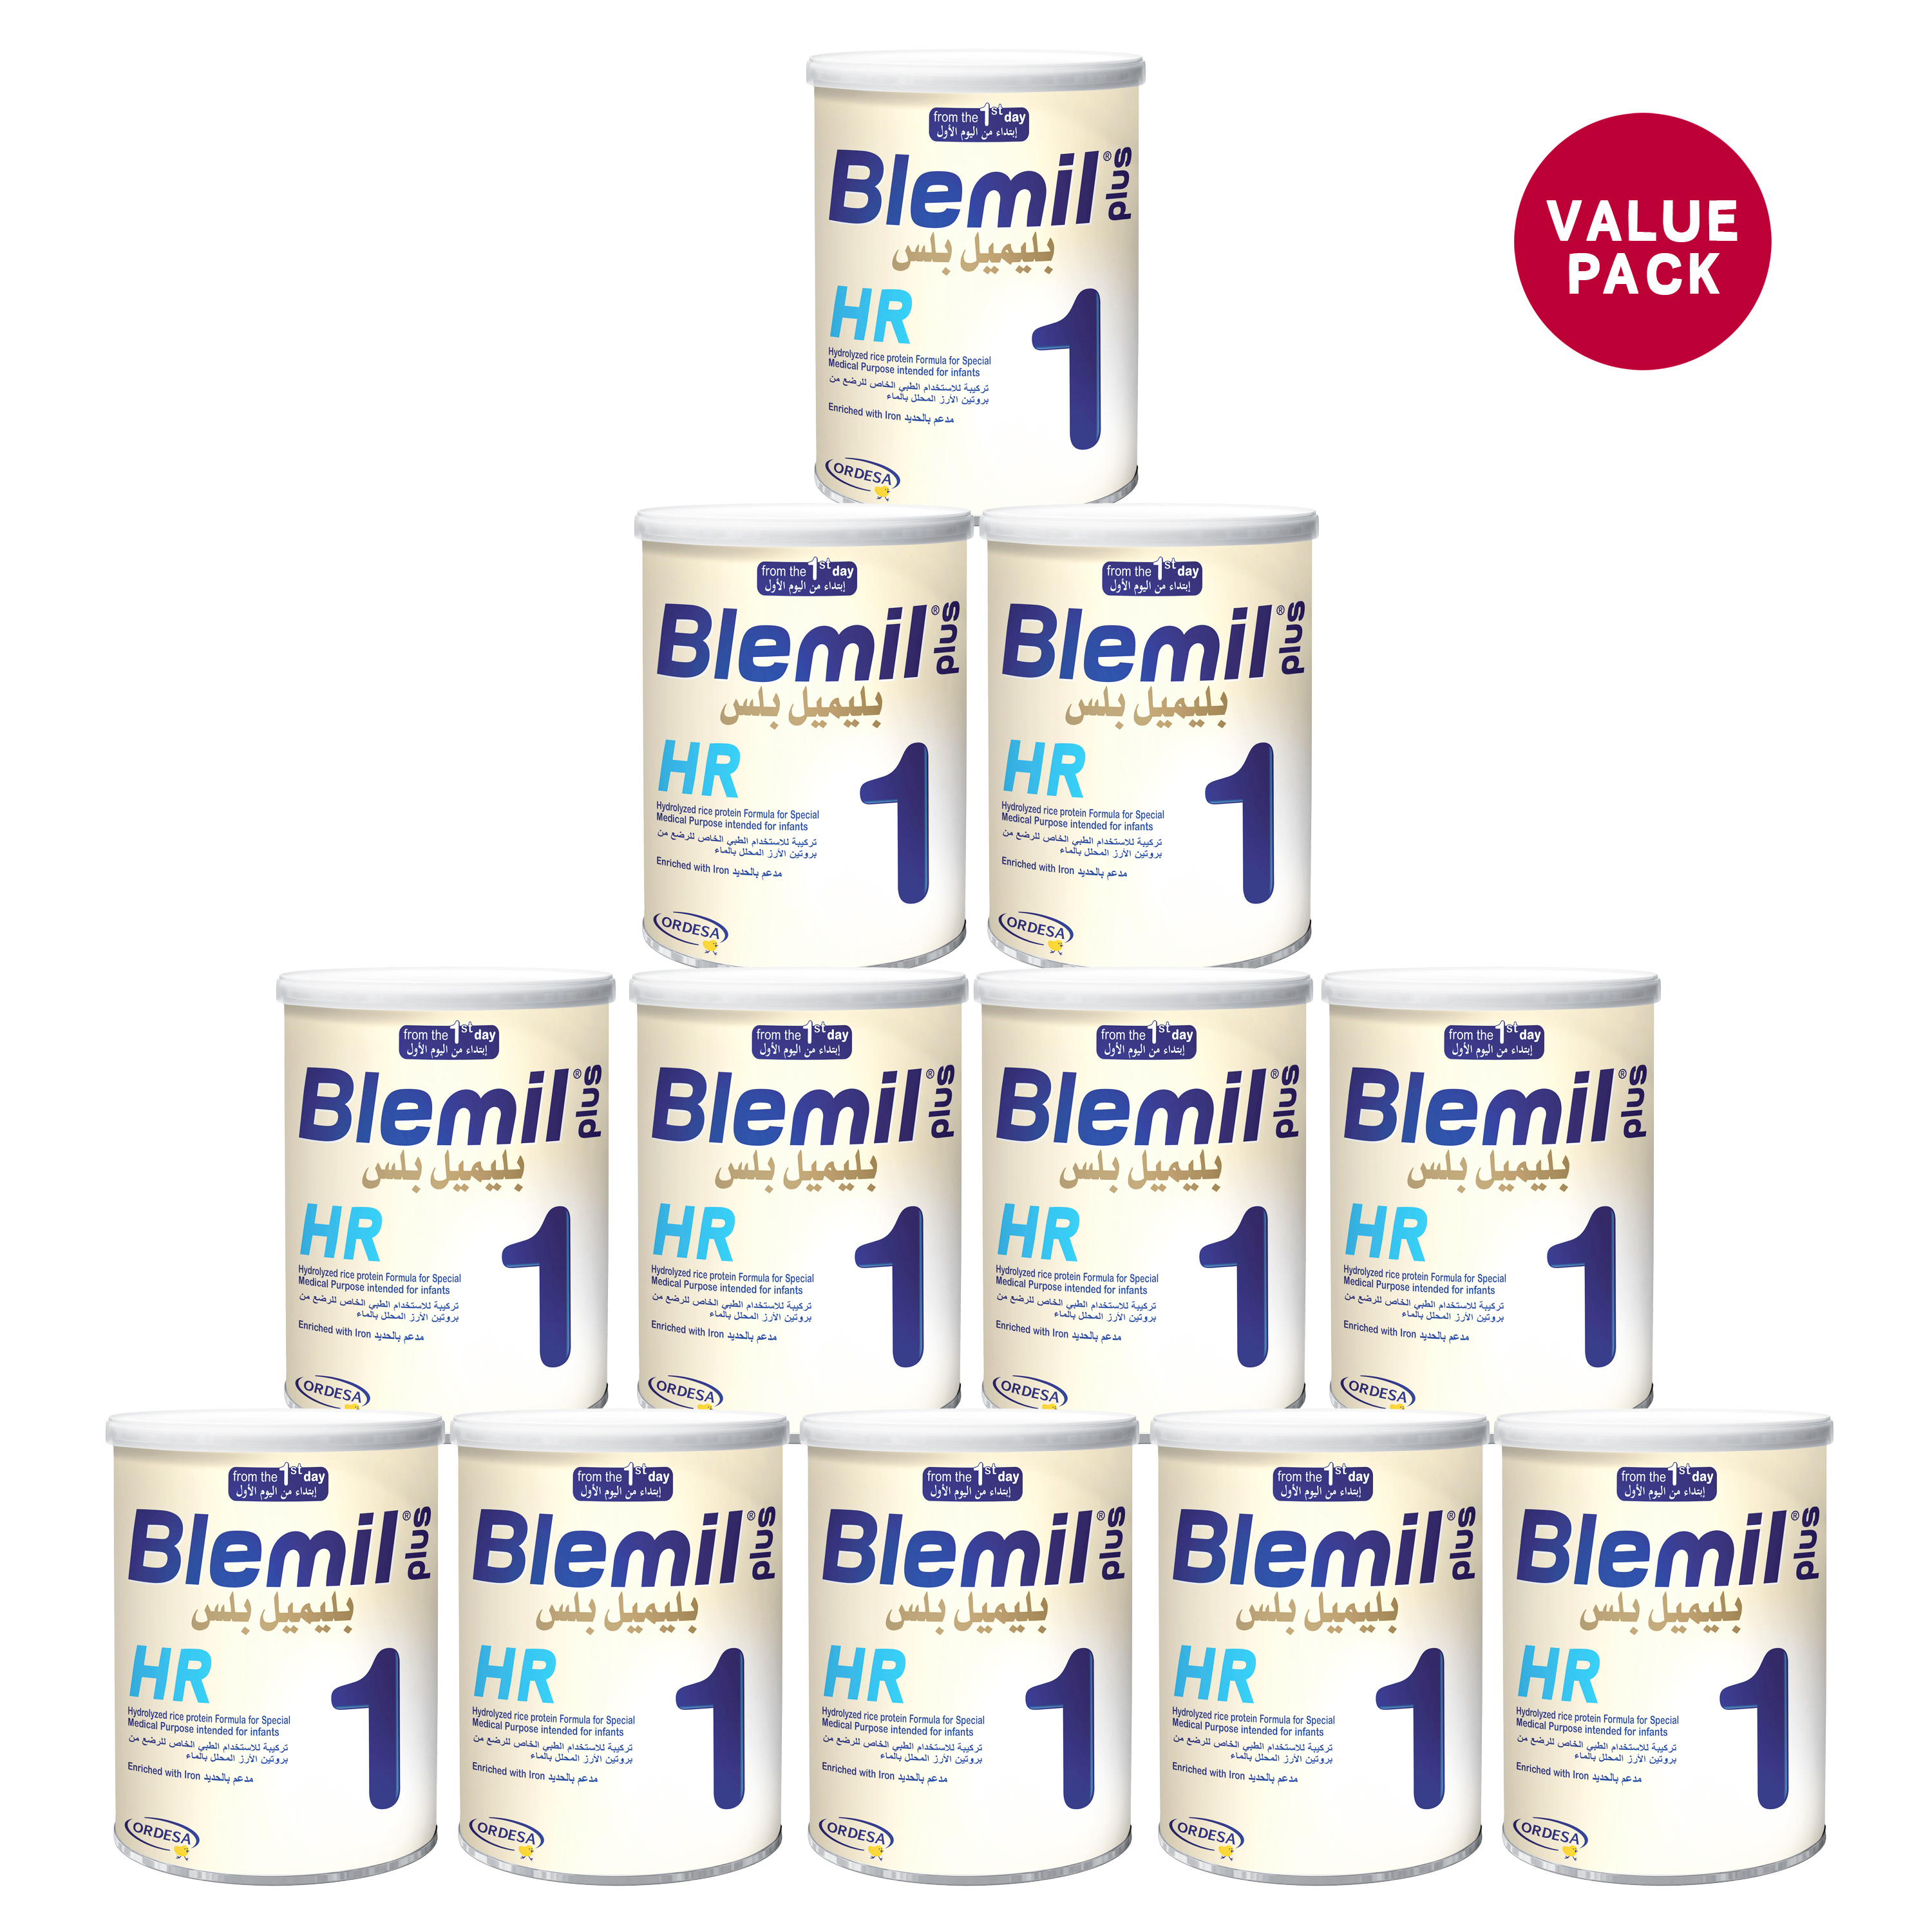 Buy Blemil Plus Confort at the best price